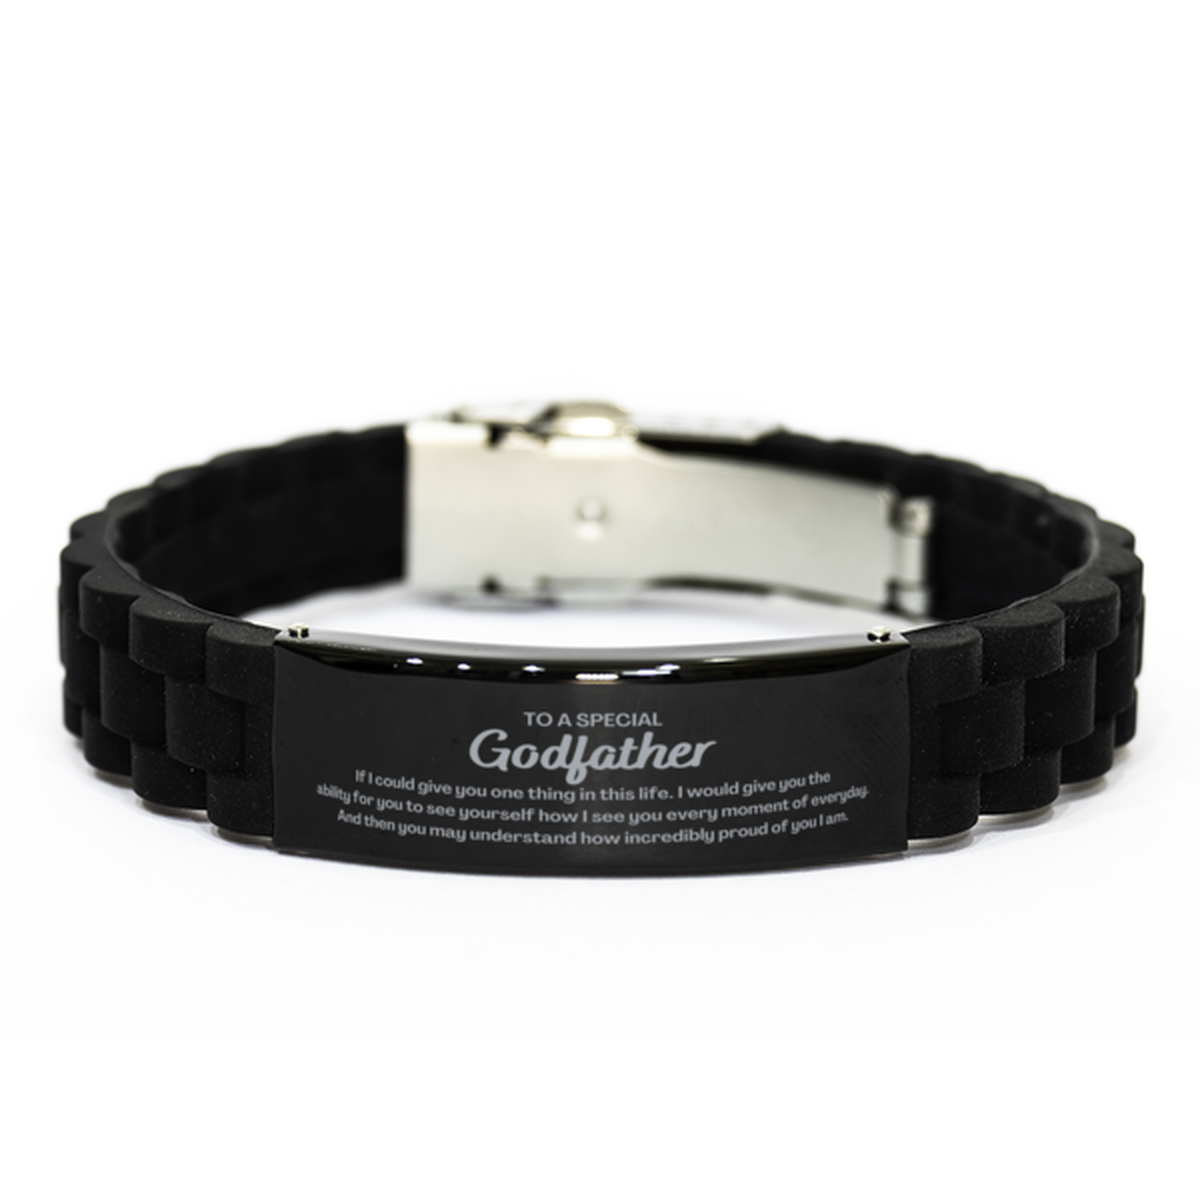 To My Godfather Black Glidelock Clasp Bracelet, Gifts For Godfather Engraved, Inspirational Gifts for Christmas Birthday, Epic Gifts for Godfather To A Special Godfather how incredibly proud of you I am